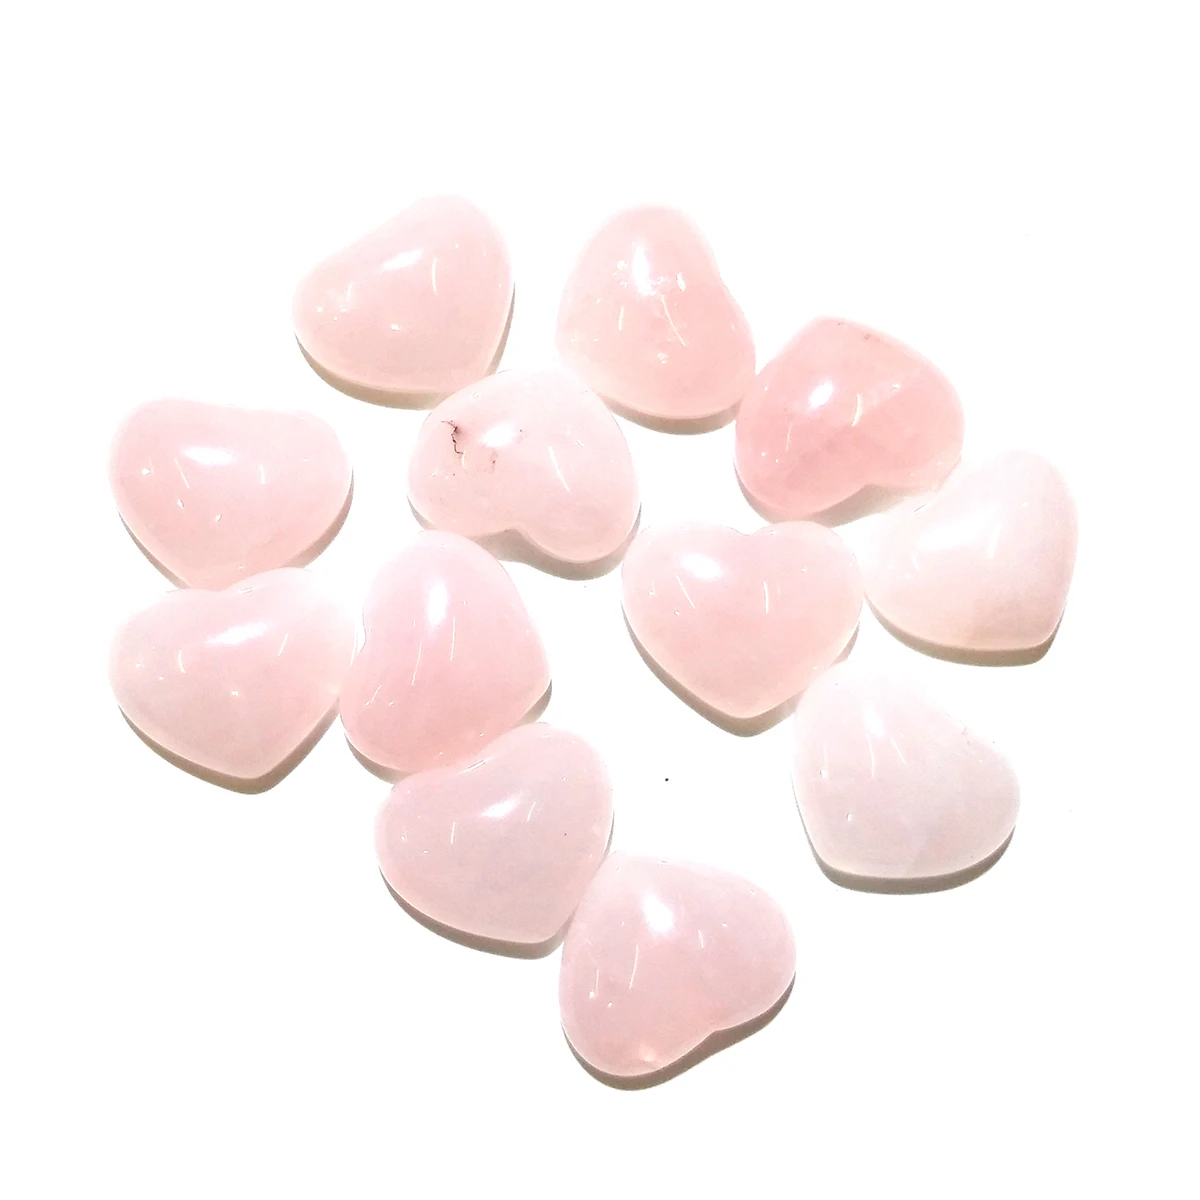 

10 Pieces Rose quartz Natural Stones Cabochon 10x10mm 15x18mm 25x25mm Heart Shape No Hole for Making Jewelry DIY